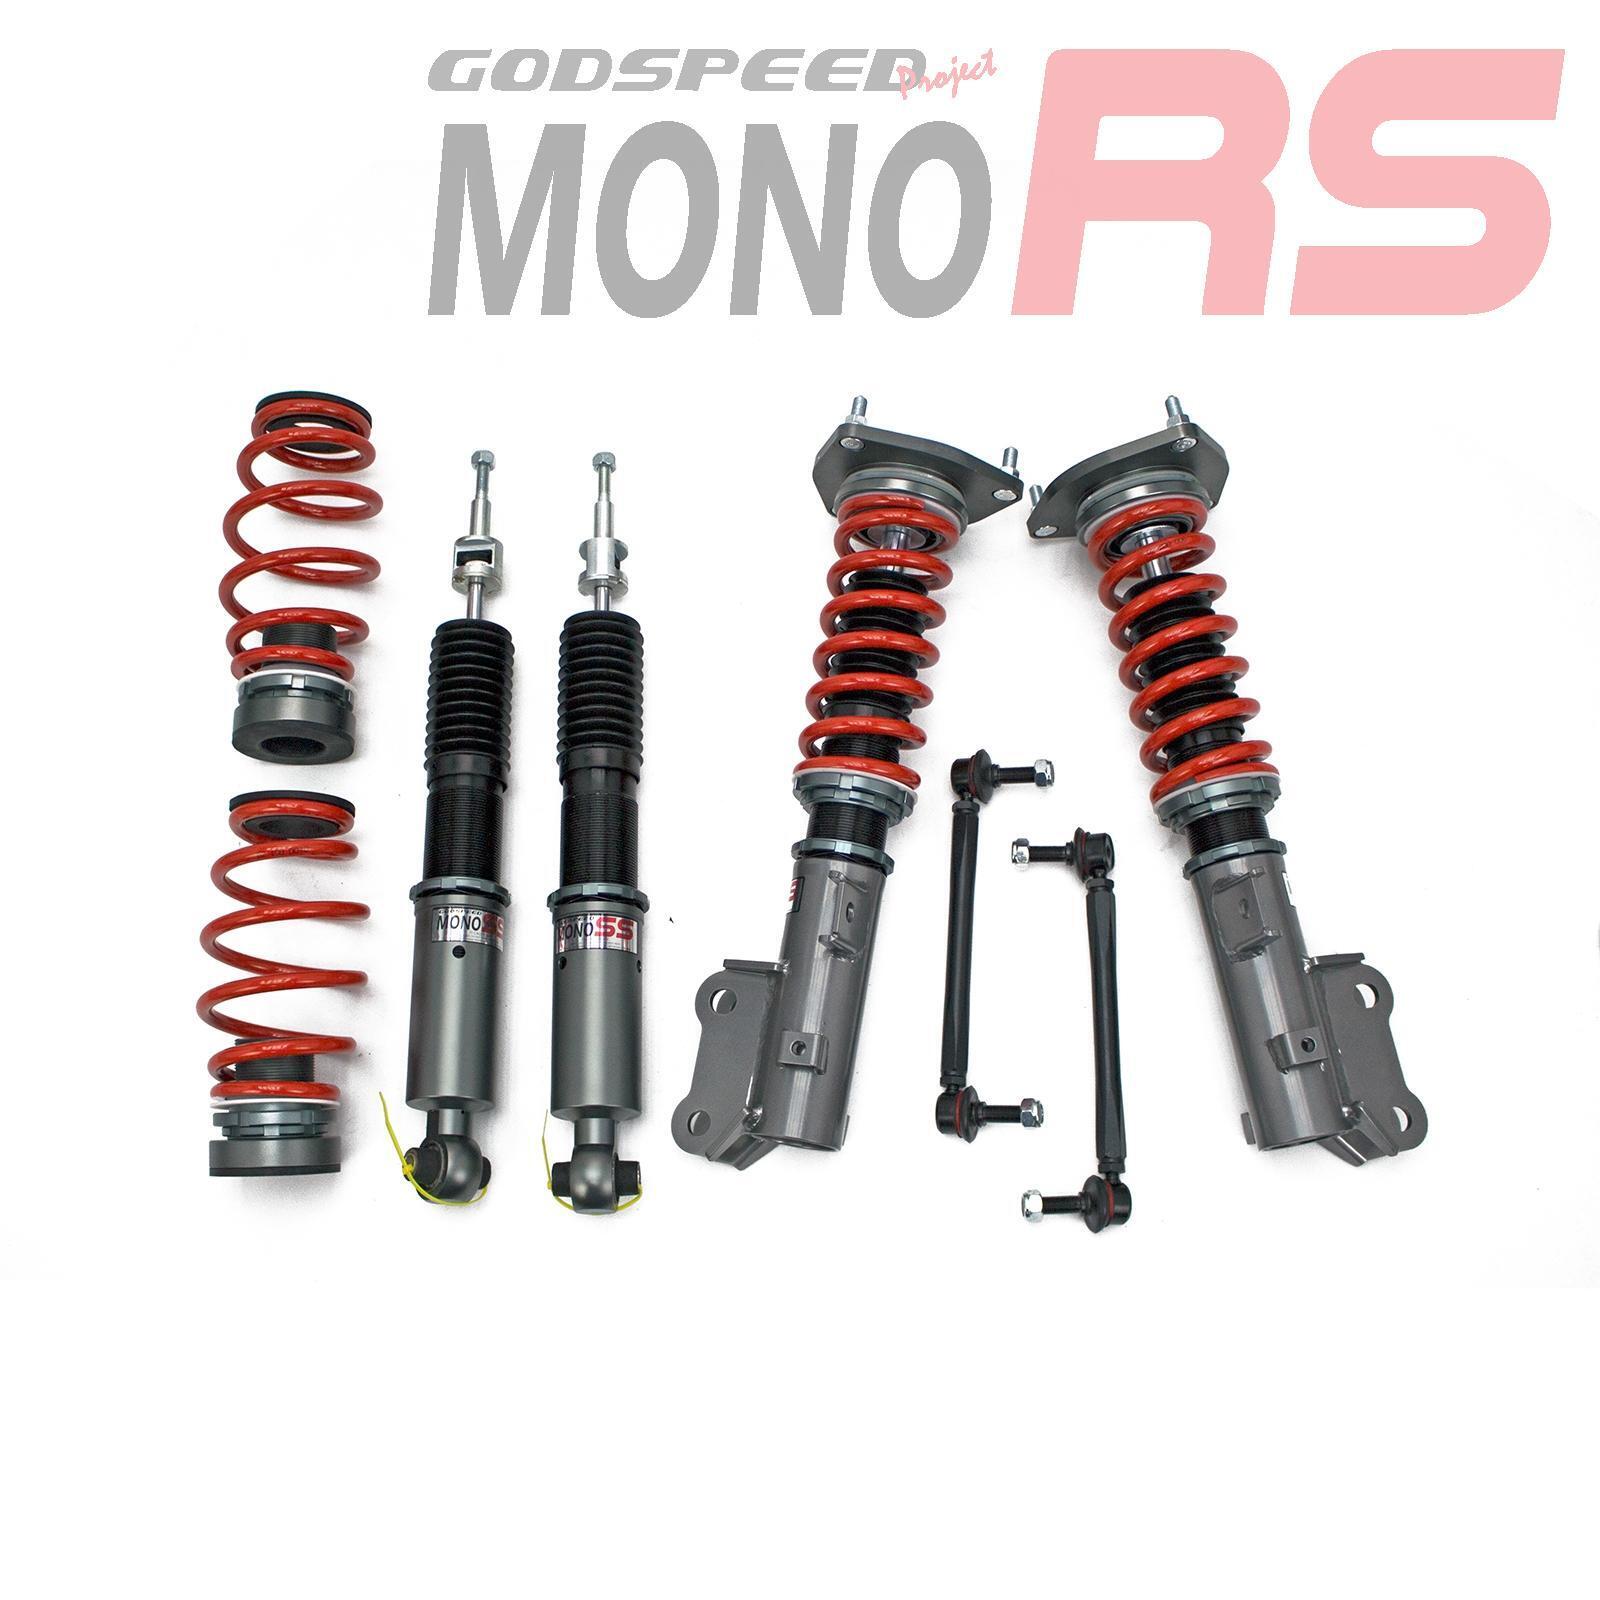 MonoRS Coilover Lowering Kit Suspensions for Veloster 2019-22 Adjustable